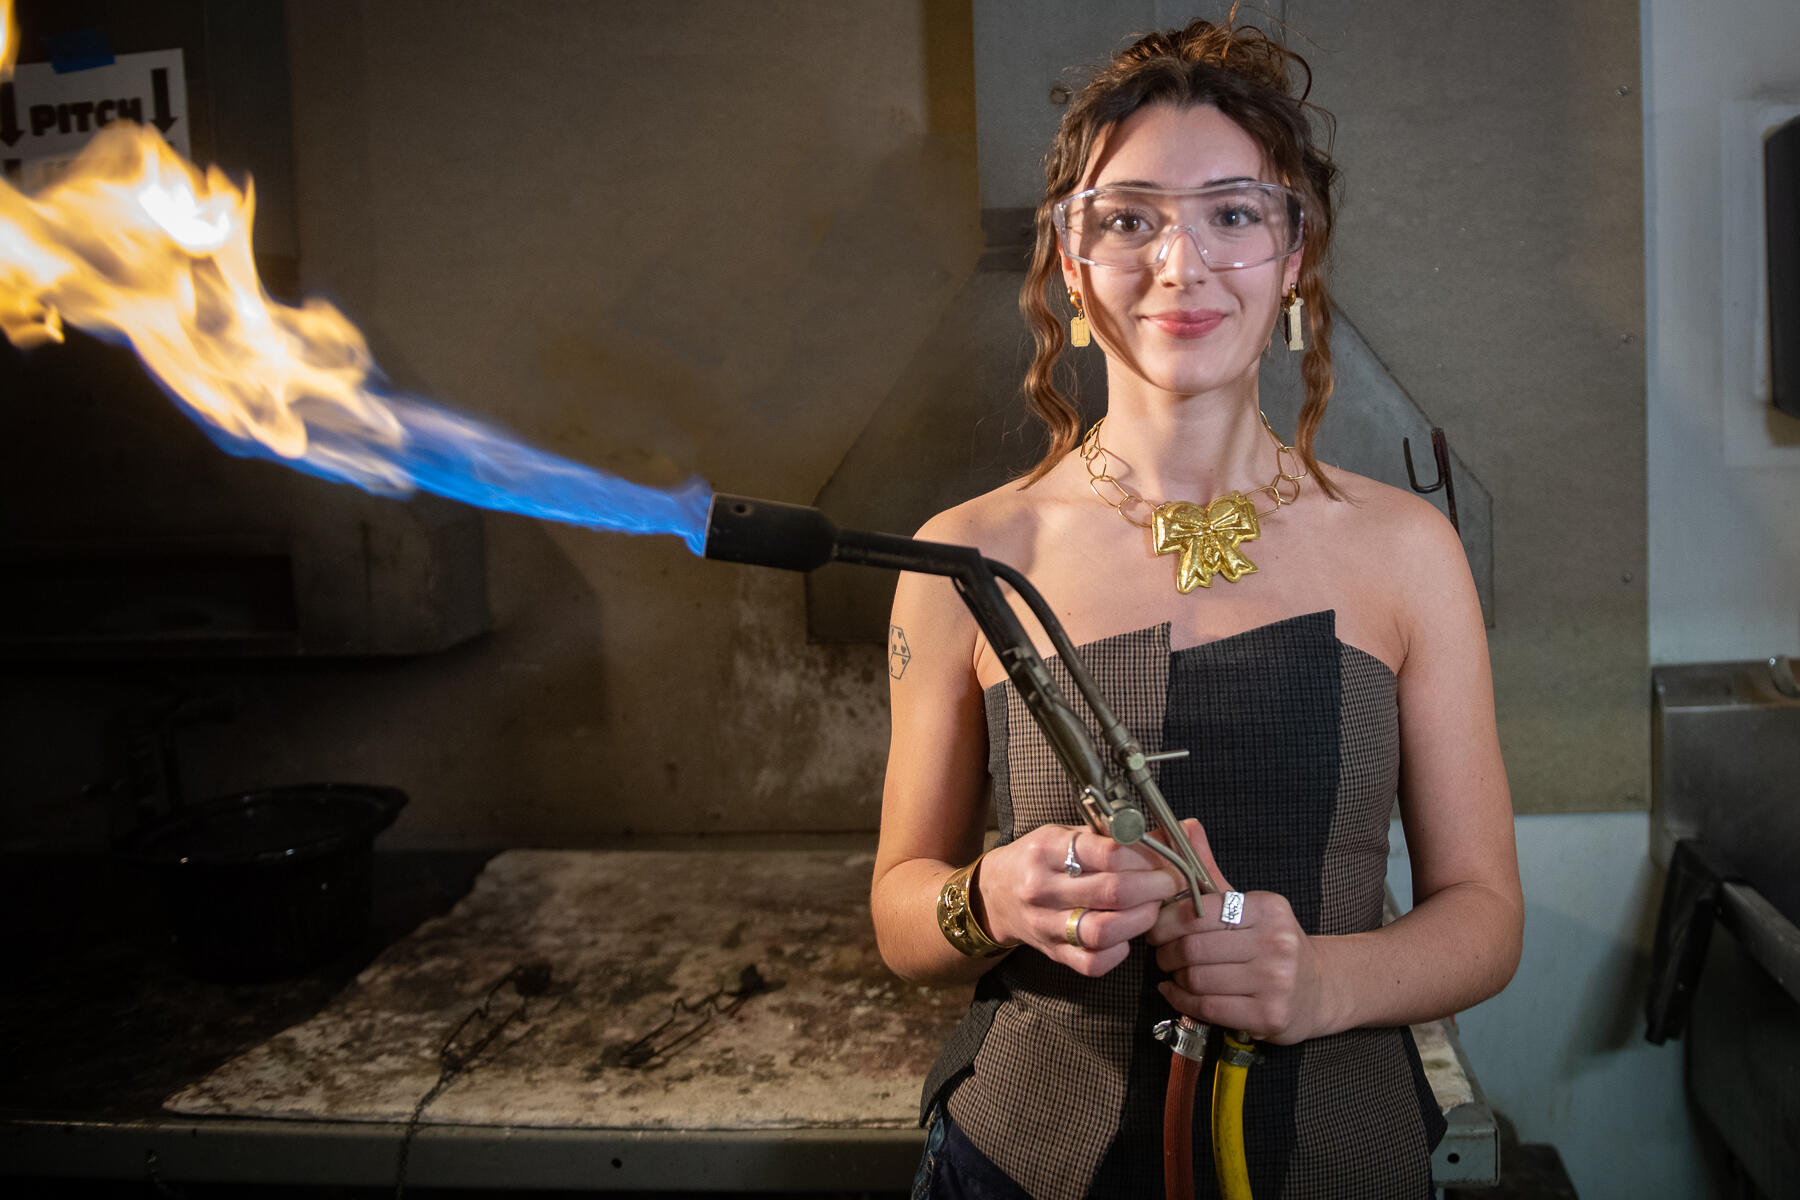 A photo of a woman wearing safety goggles and holding a blow torch while wearing a stylish top, a necklace, and earrings. 